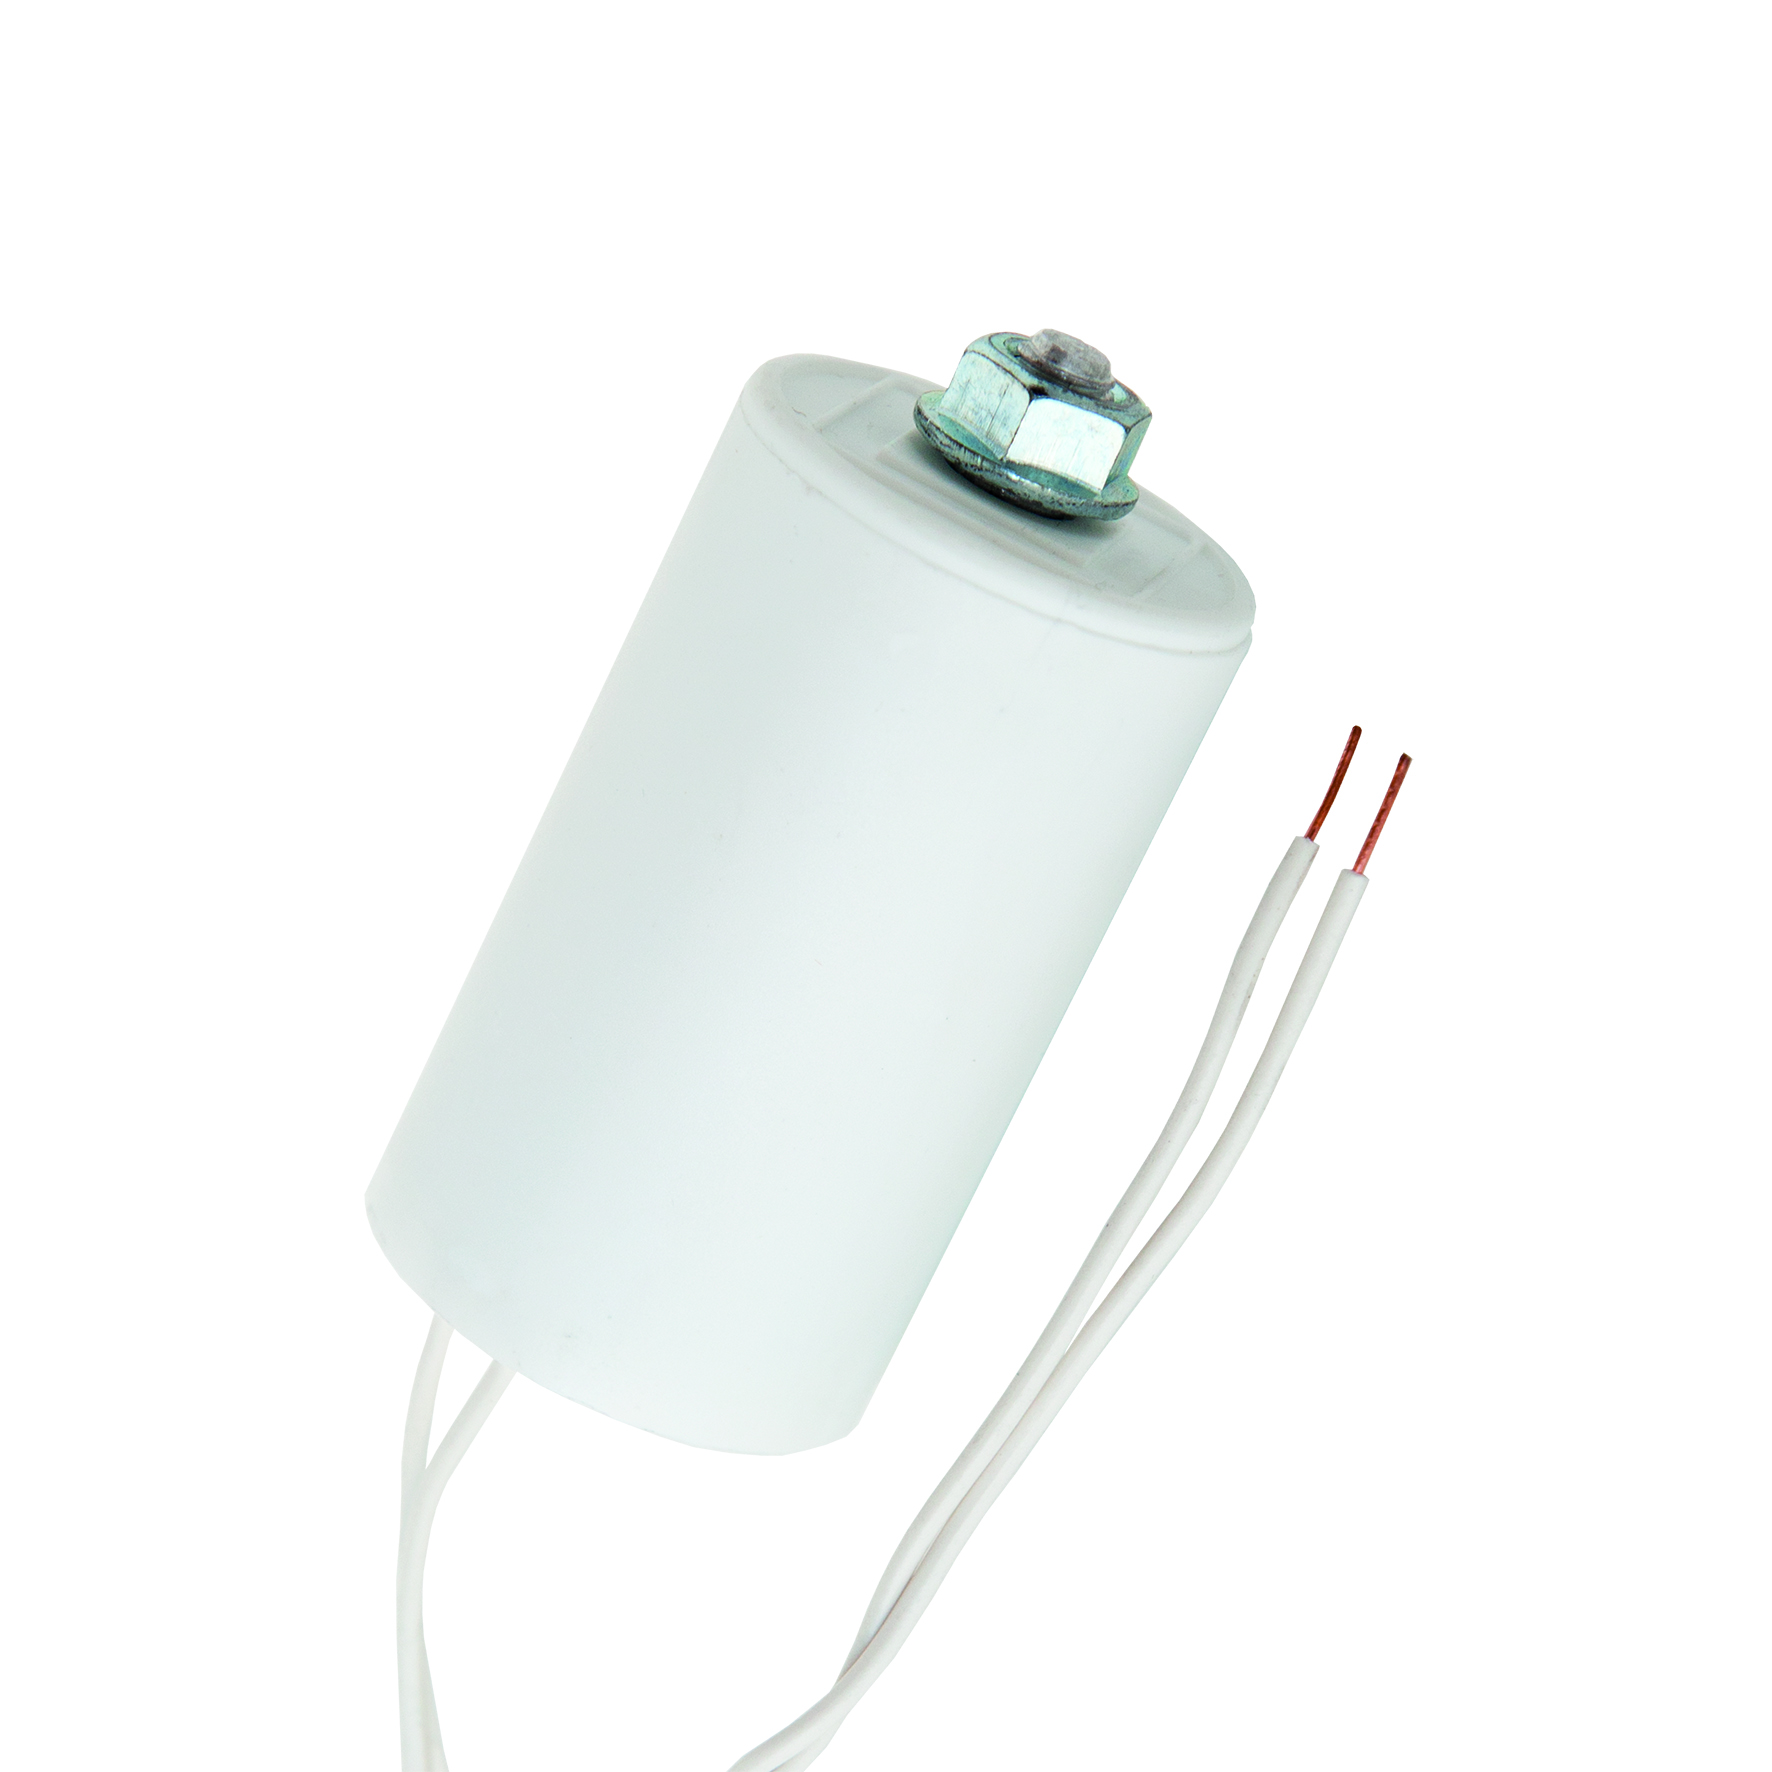 VEN Capacitor 25UF 250V 300mm Cable